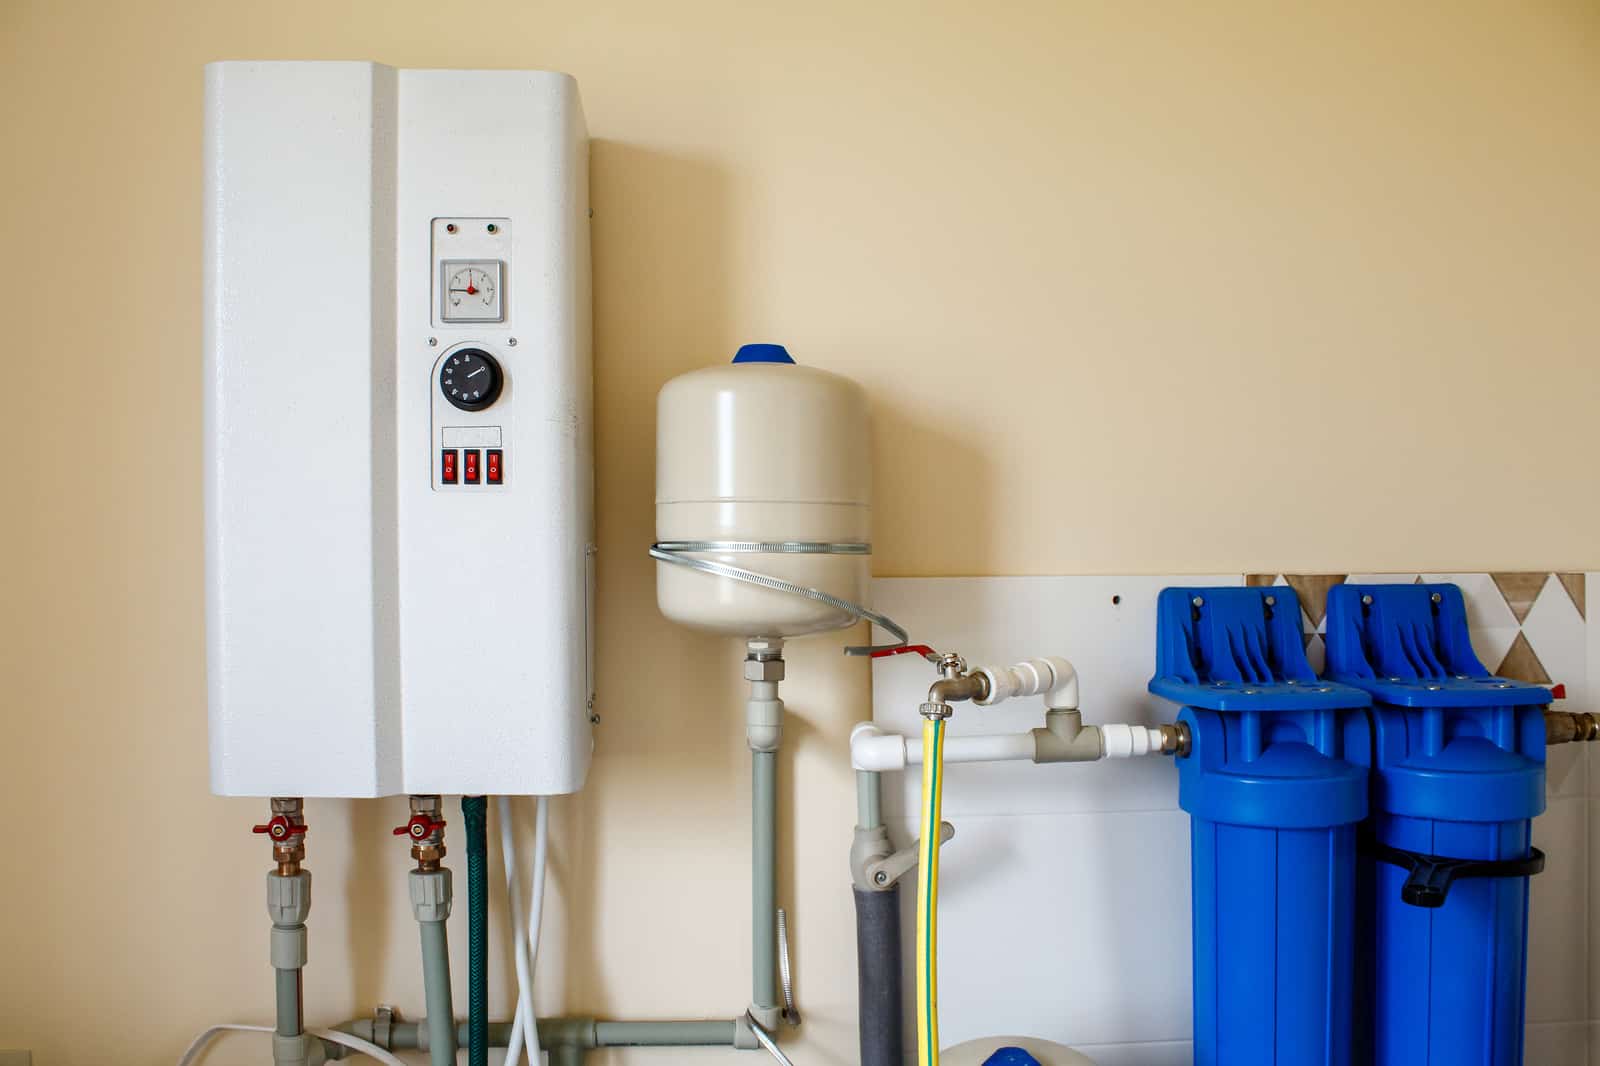 This tankless water heater is an example of green renovations that save you money and improve your home.